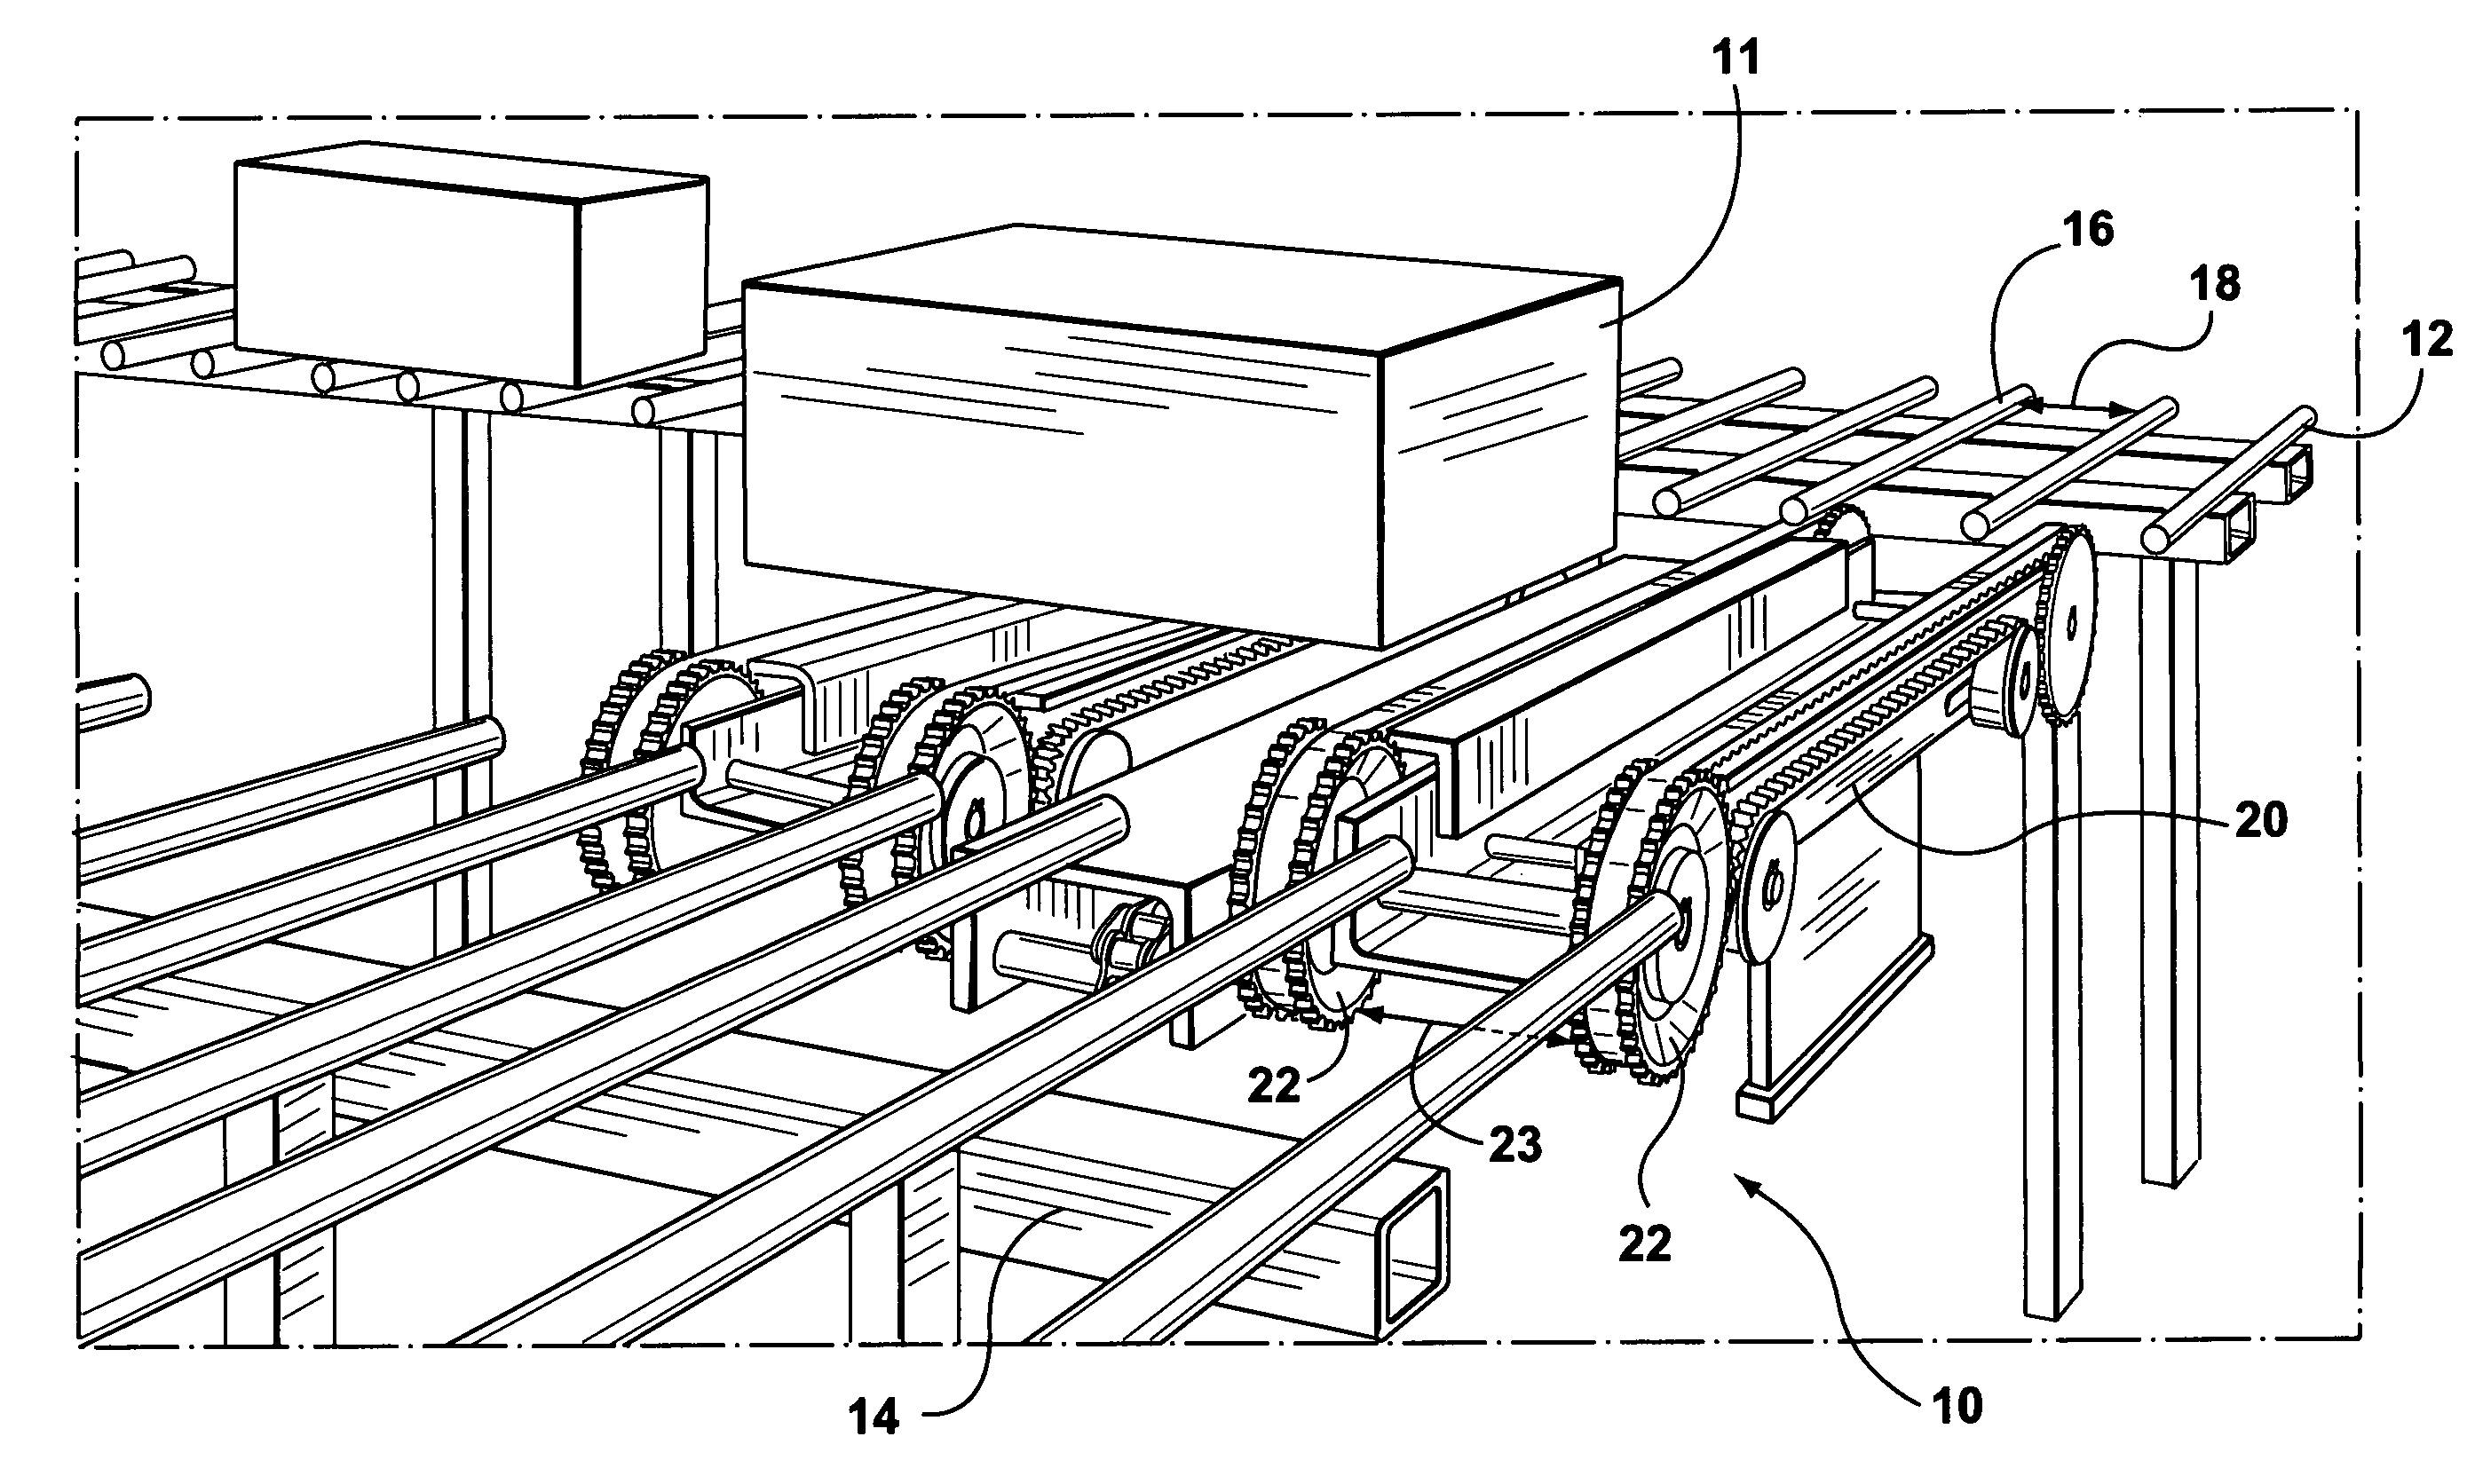 Rack, conveyor and shuttle automated pick system